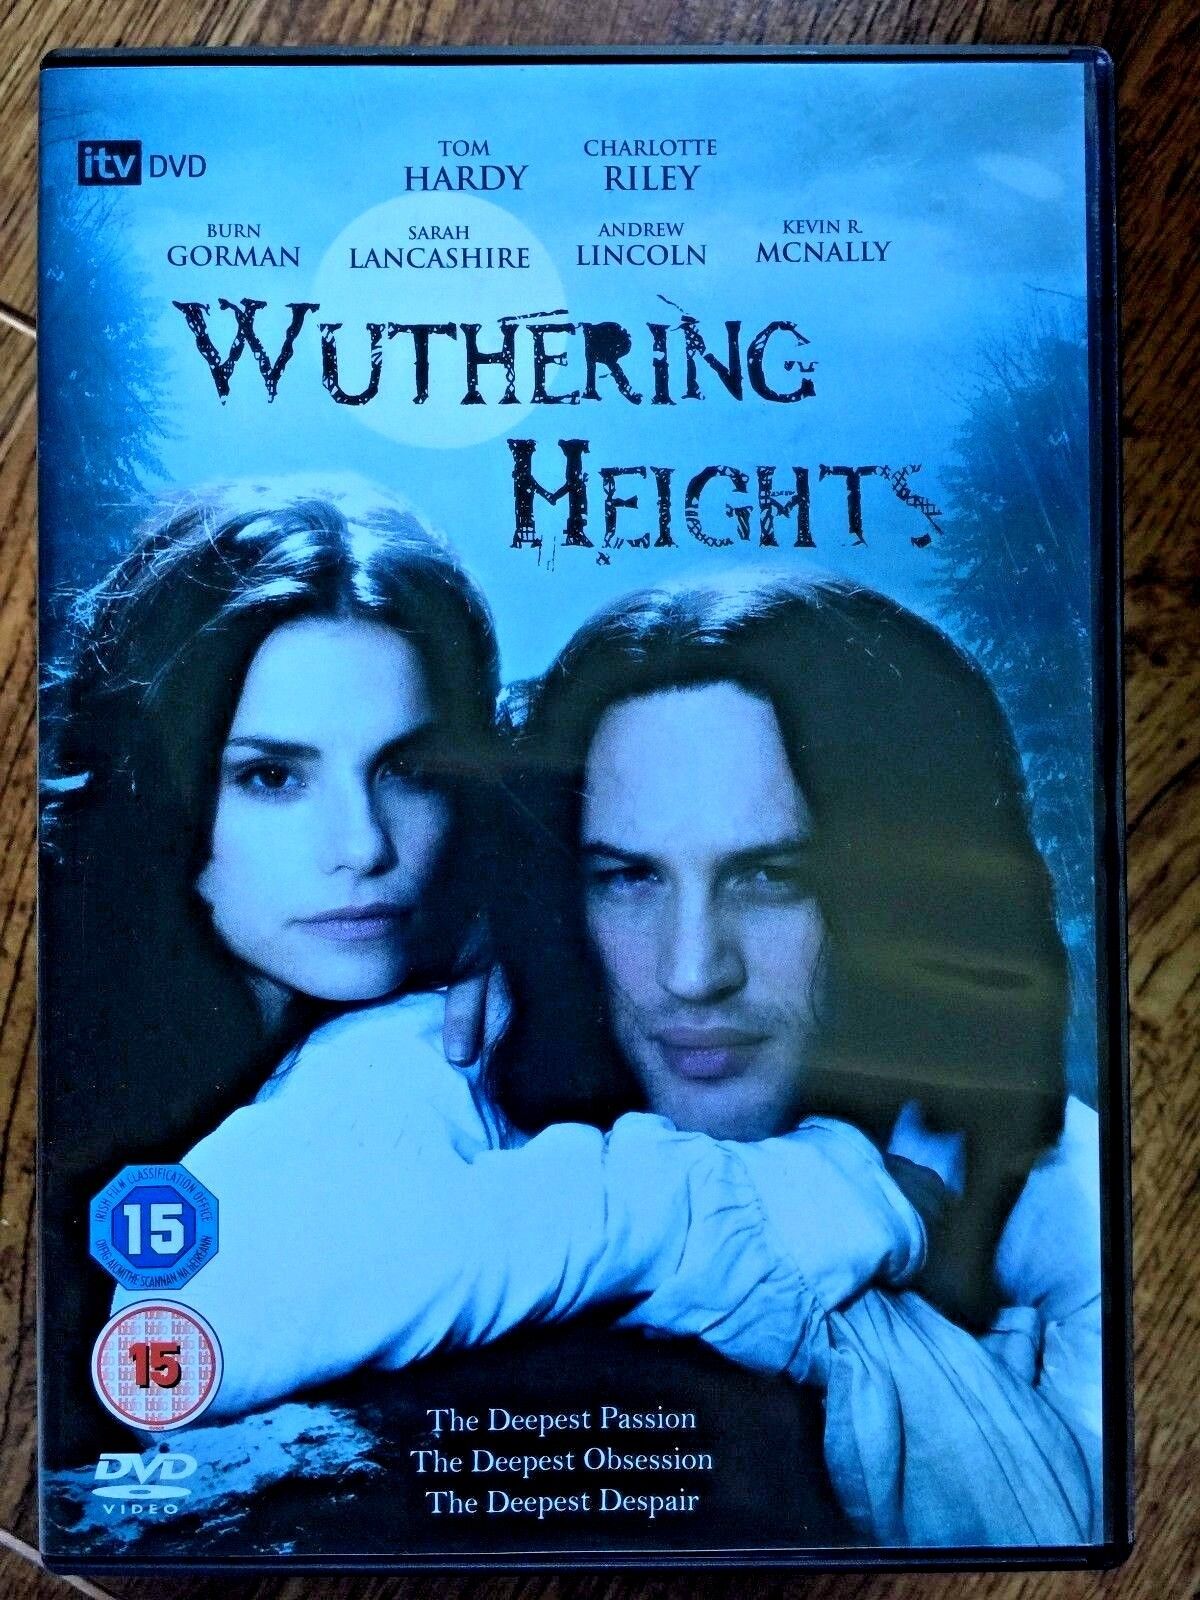 Reductor overdracht onderschrift Wuthering Heights DVD 2009 Bronte TV Mini Series w/ Tom Hardy Charlotte  Riley 5060092905640 | eBay